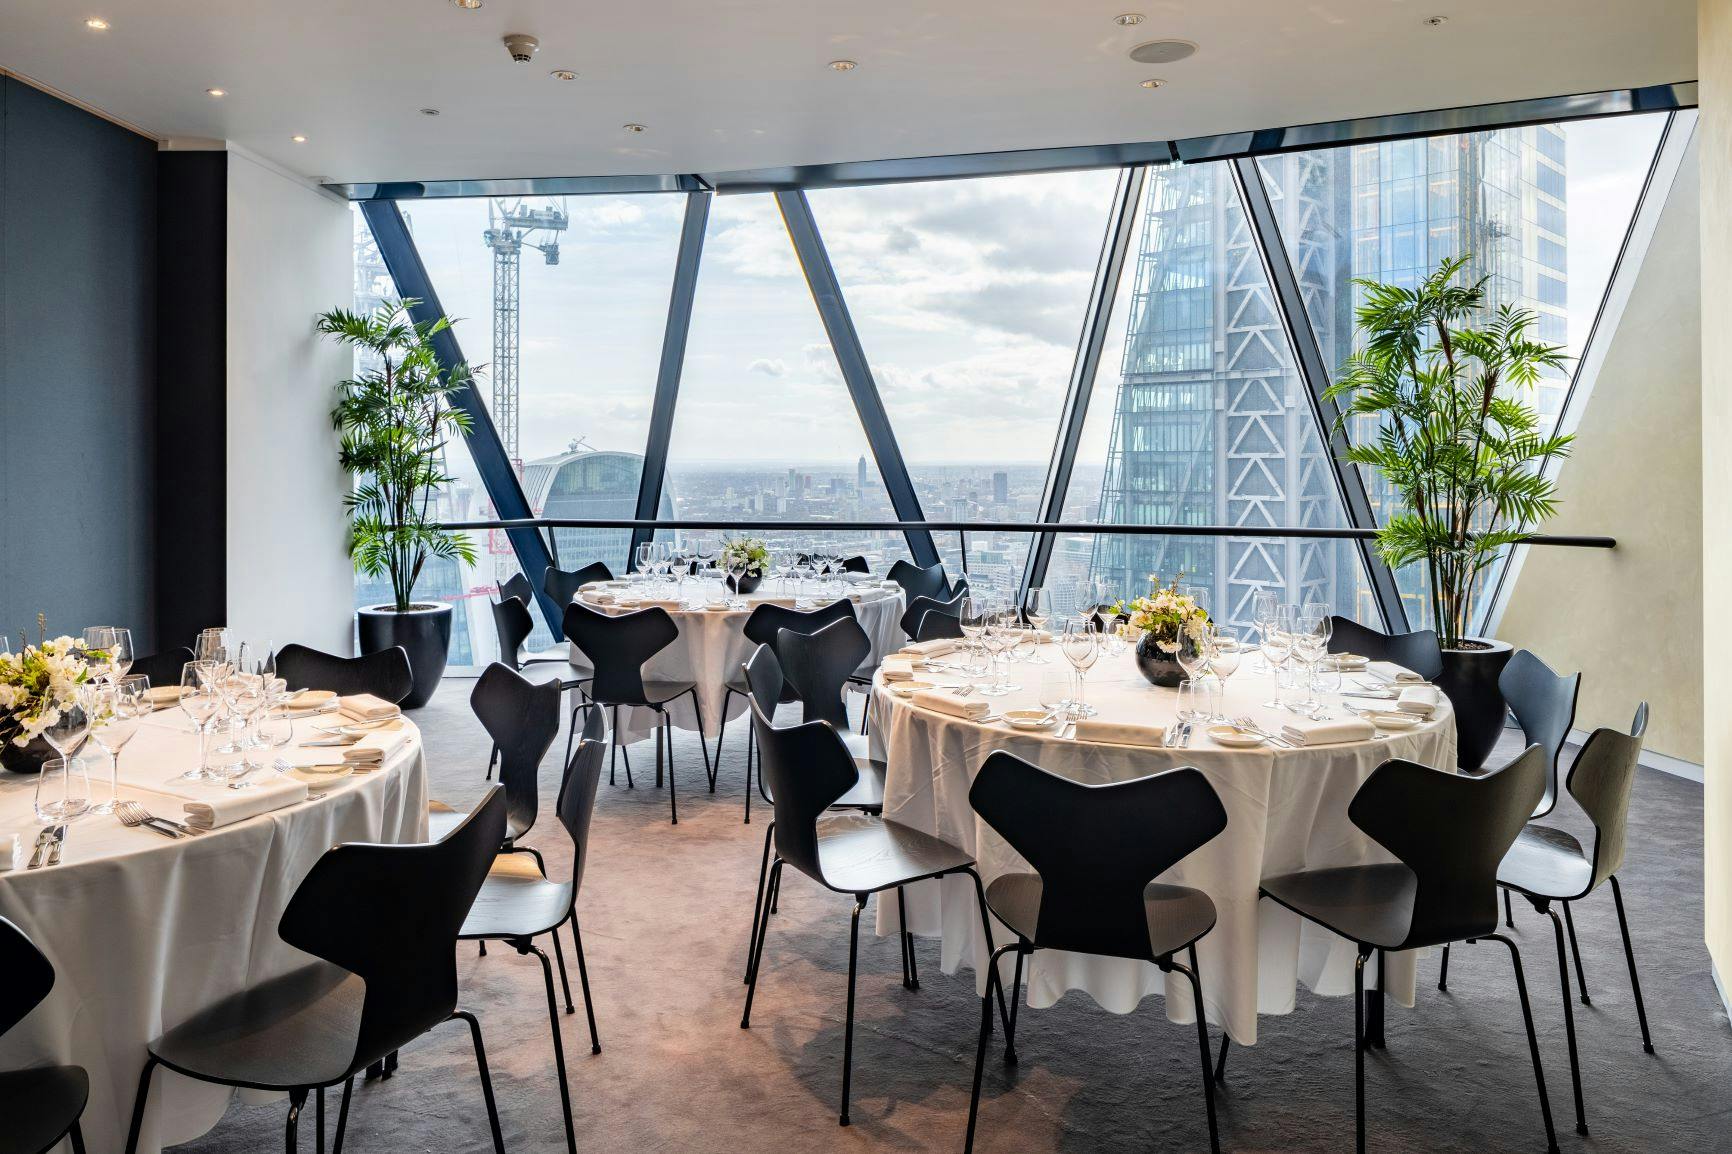 Searcys at the Gherkin - Single private dining room image 2